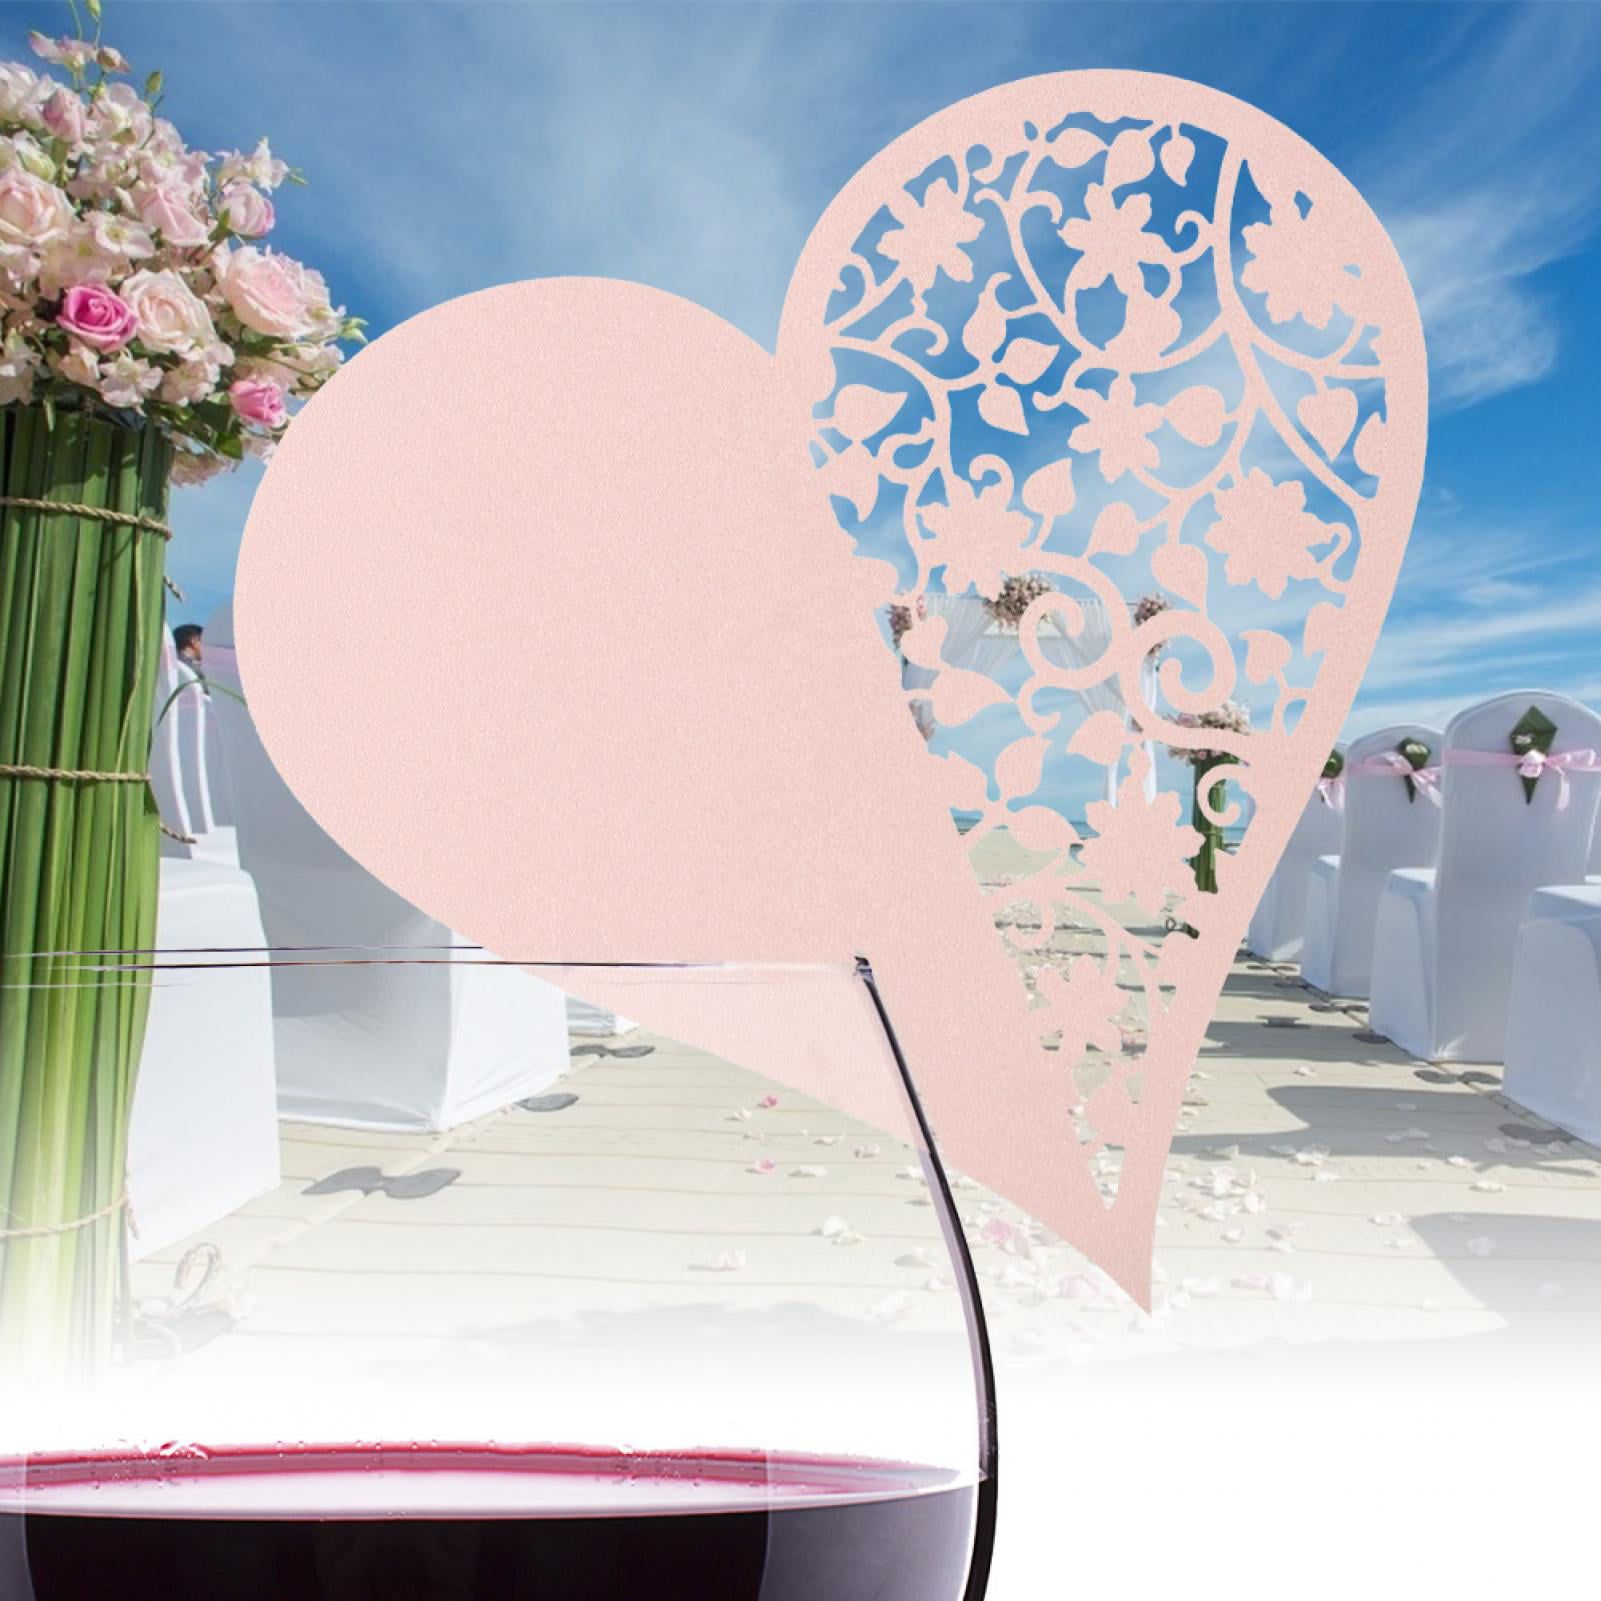 50Pcs Table Place Name Card Wine Glass Wedding Cards Party Birthday Decoration 